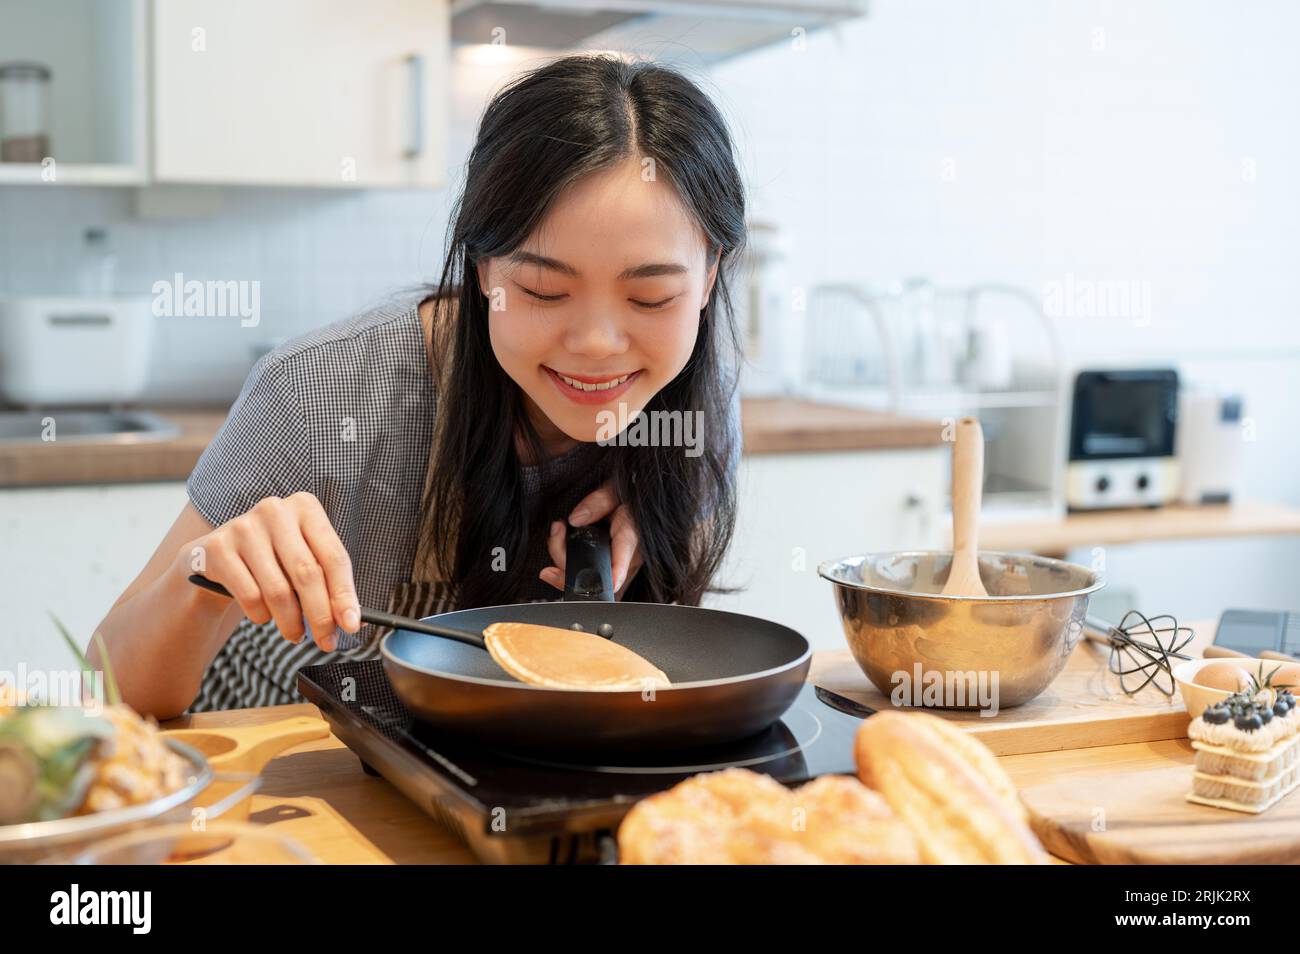 https://c8.alamy.com/comp/2RJK2RX/a-happy-and-lovely-young-asian-woman-flipping-a-pancake-in-a-pan-with-a-spatula-enjoys-cooking-pancakes-in-the-kitchen-preparing-homemade-breakfast-2RJK2RX.jpg